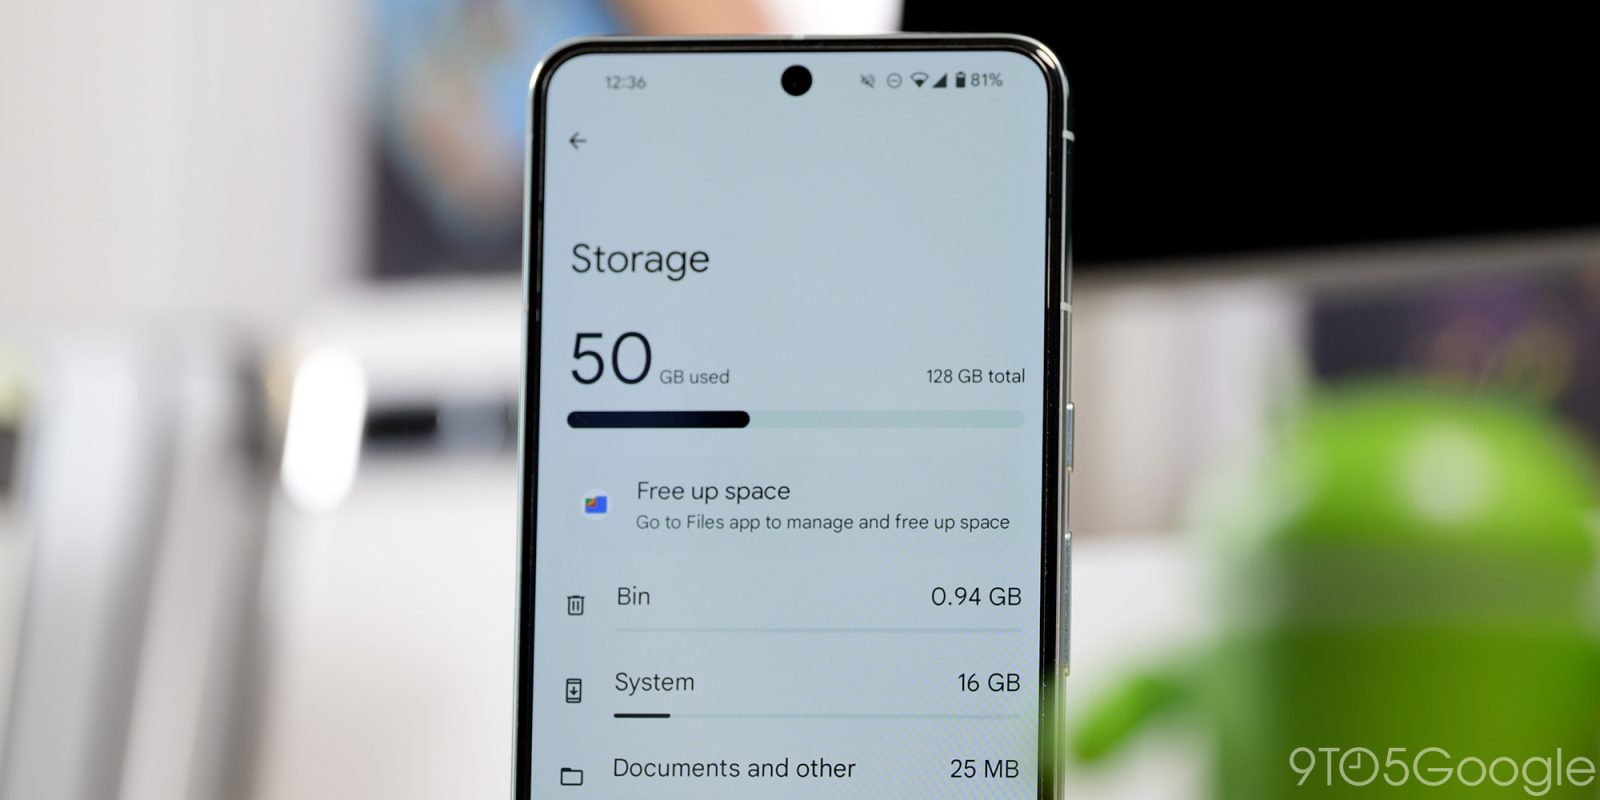 Android still doesn’t show battery health, but it could soon show storage health